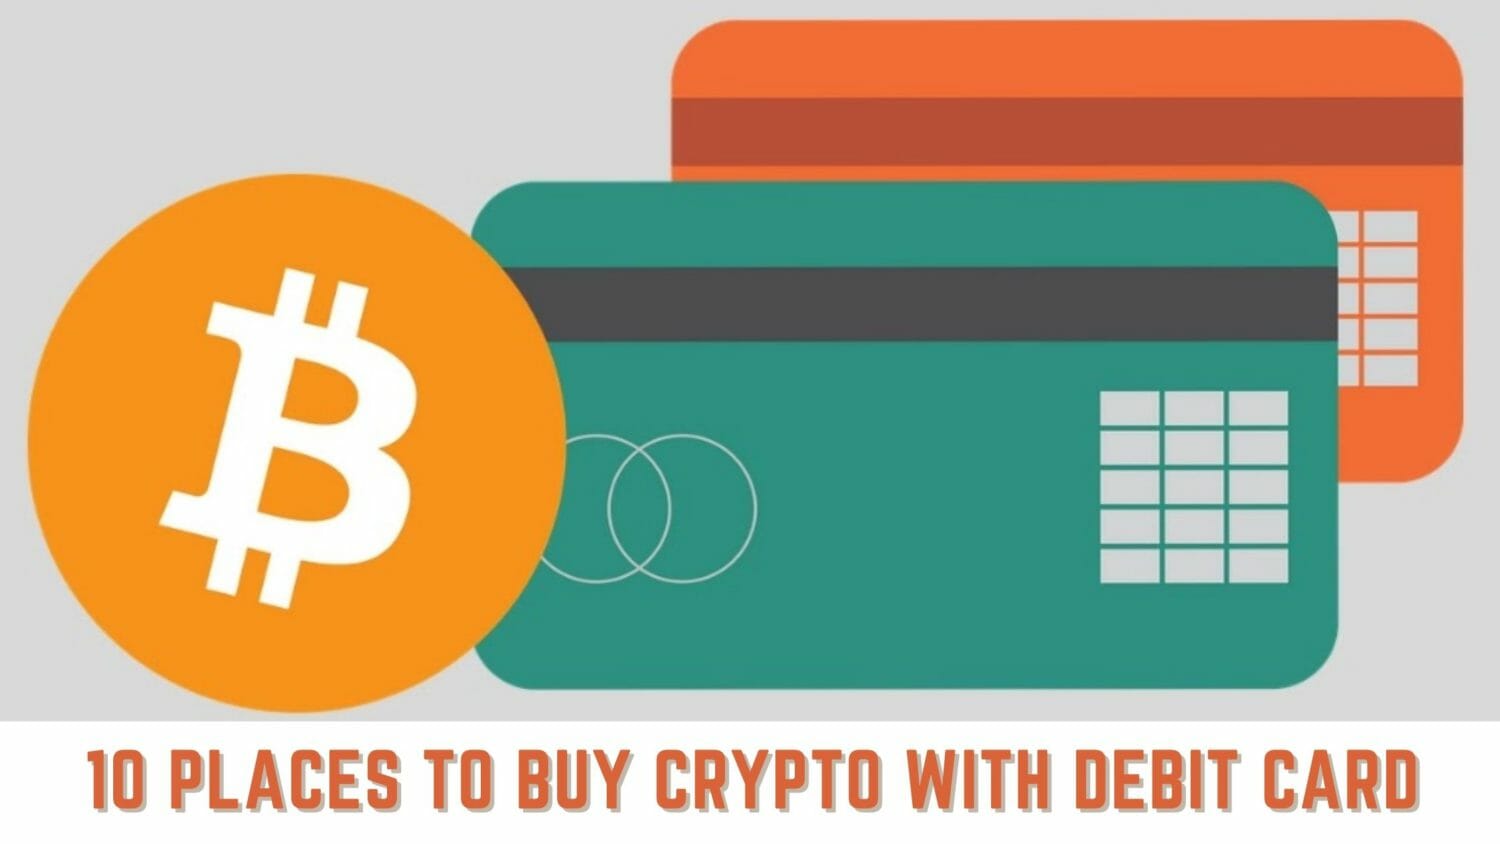 10 Places To Buy Crypto With Debit Card